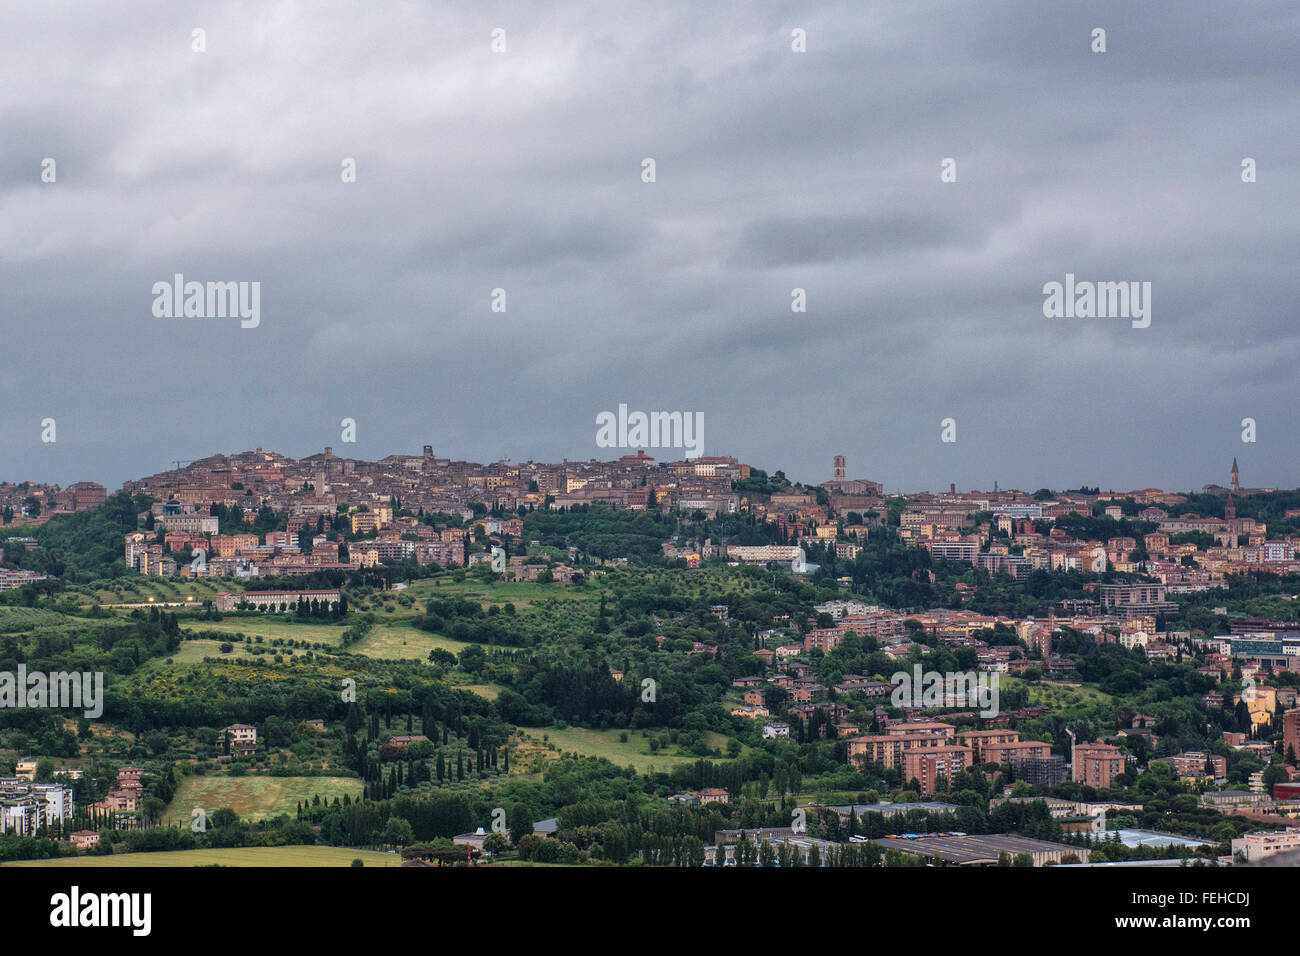 Panoramic photo of Perugia, the capital of Umbria, center of Italy. The picture shows that the city is on a hill. Stock Photo